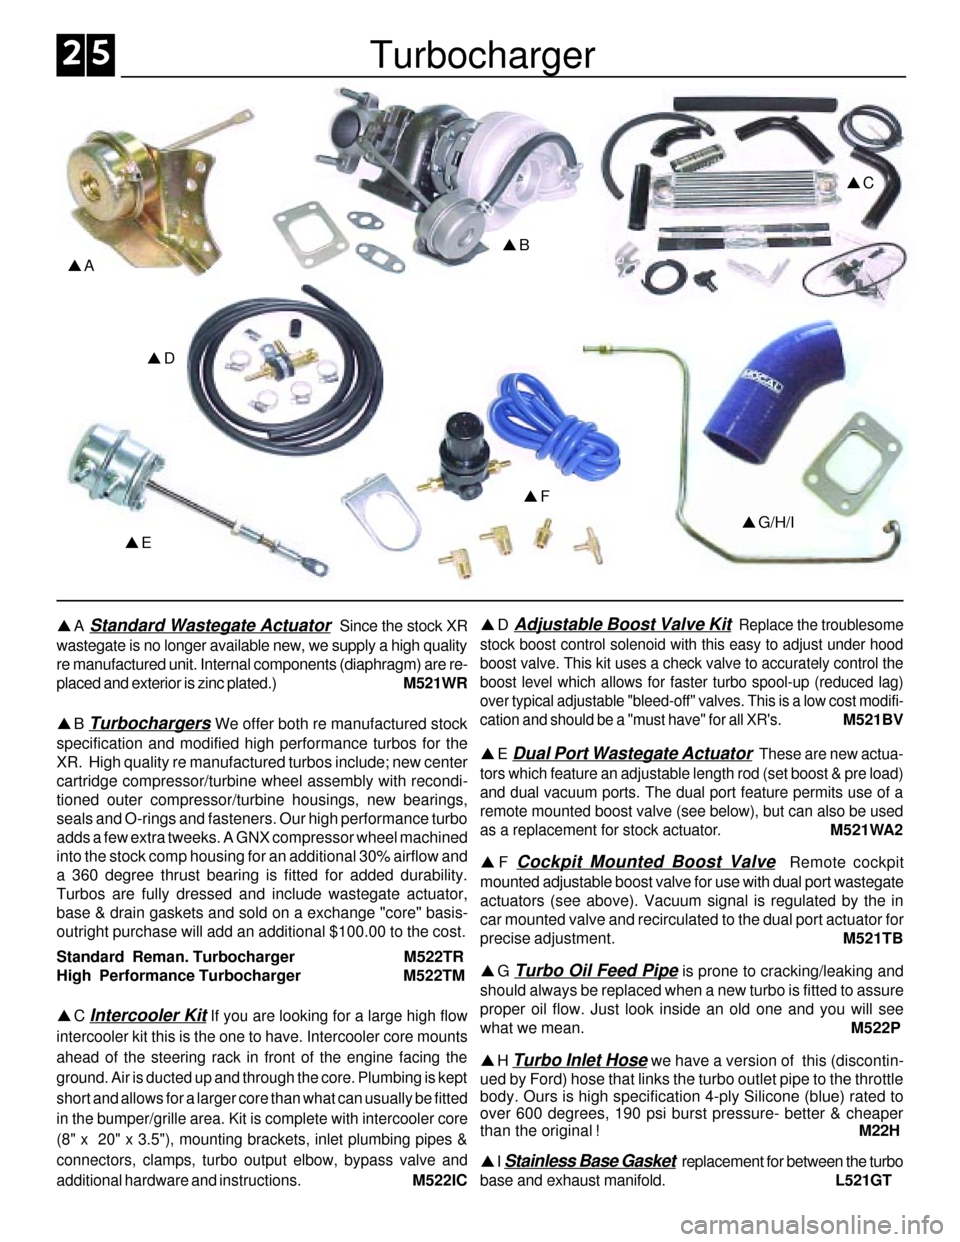 FORD SIERRA 1990 2.G XR4 Workshop Manual Turbocharger
pC
pG/H/I
pF
pD
pA
pB
pE
pA Standard Wastegate Actuator  Since the stock XR
wastegate is no longer available new, we supply a high quality
re manufactured unit. Internal components (diaph